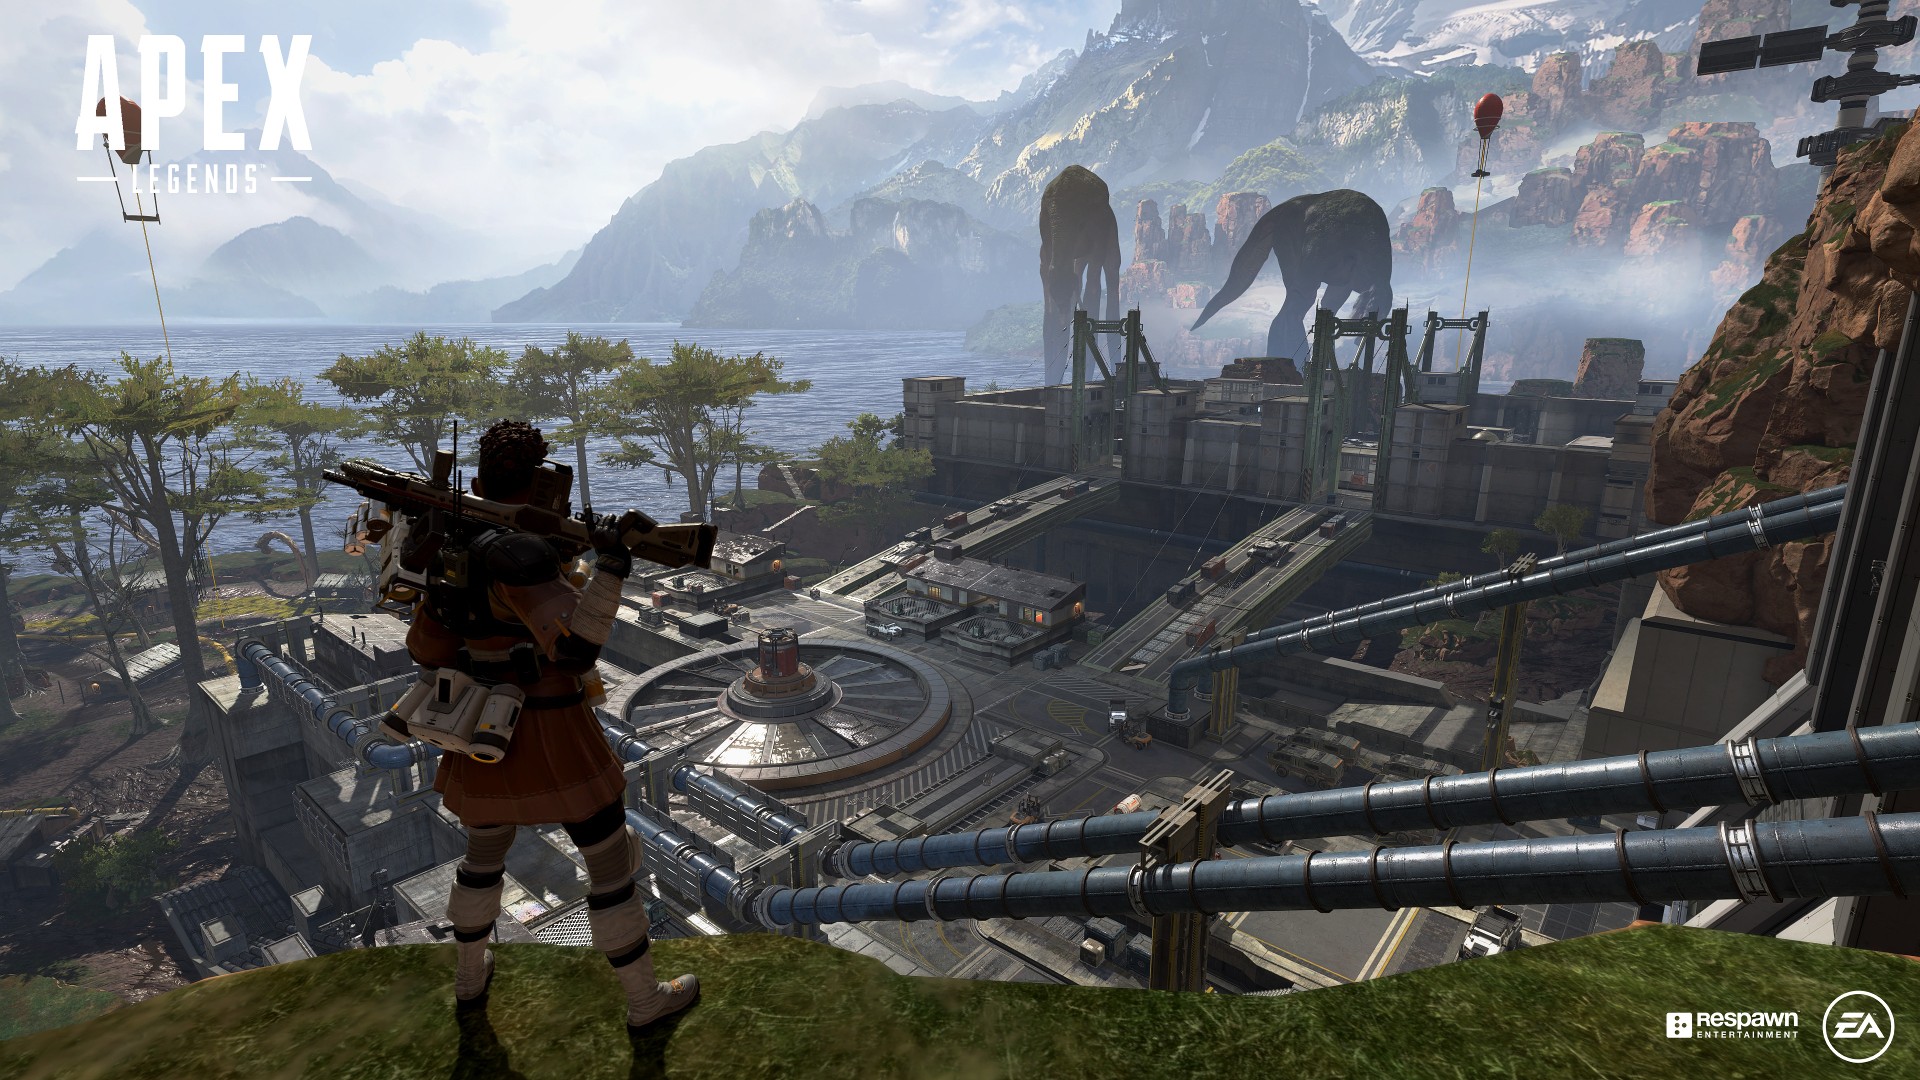 10 Reasons Why Apex Legends is the Most Thrilling Battle Royale Game Ever